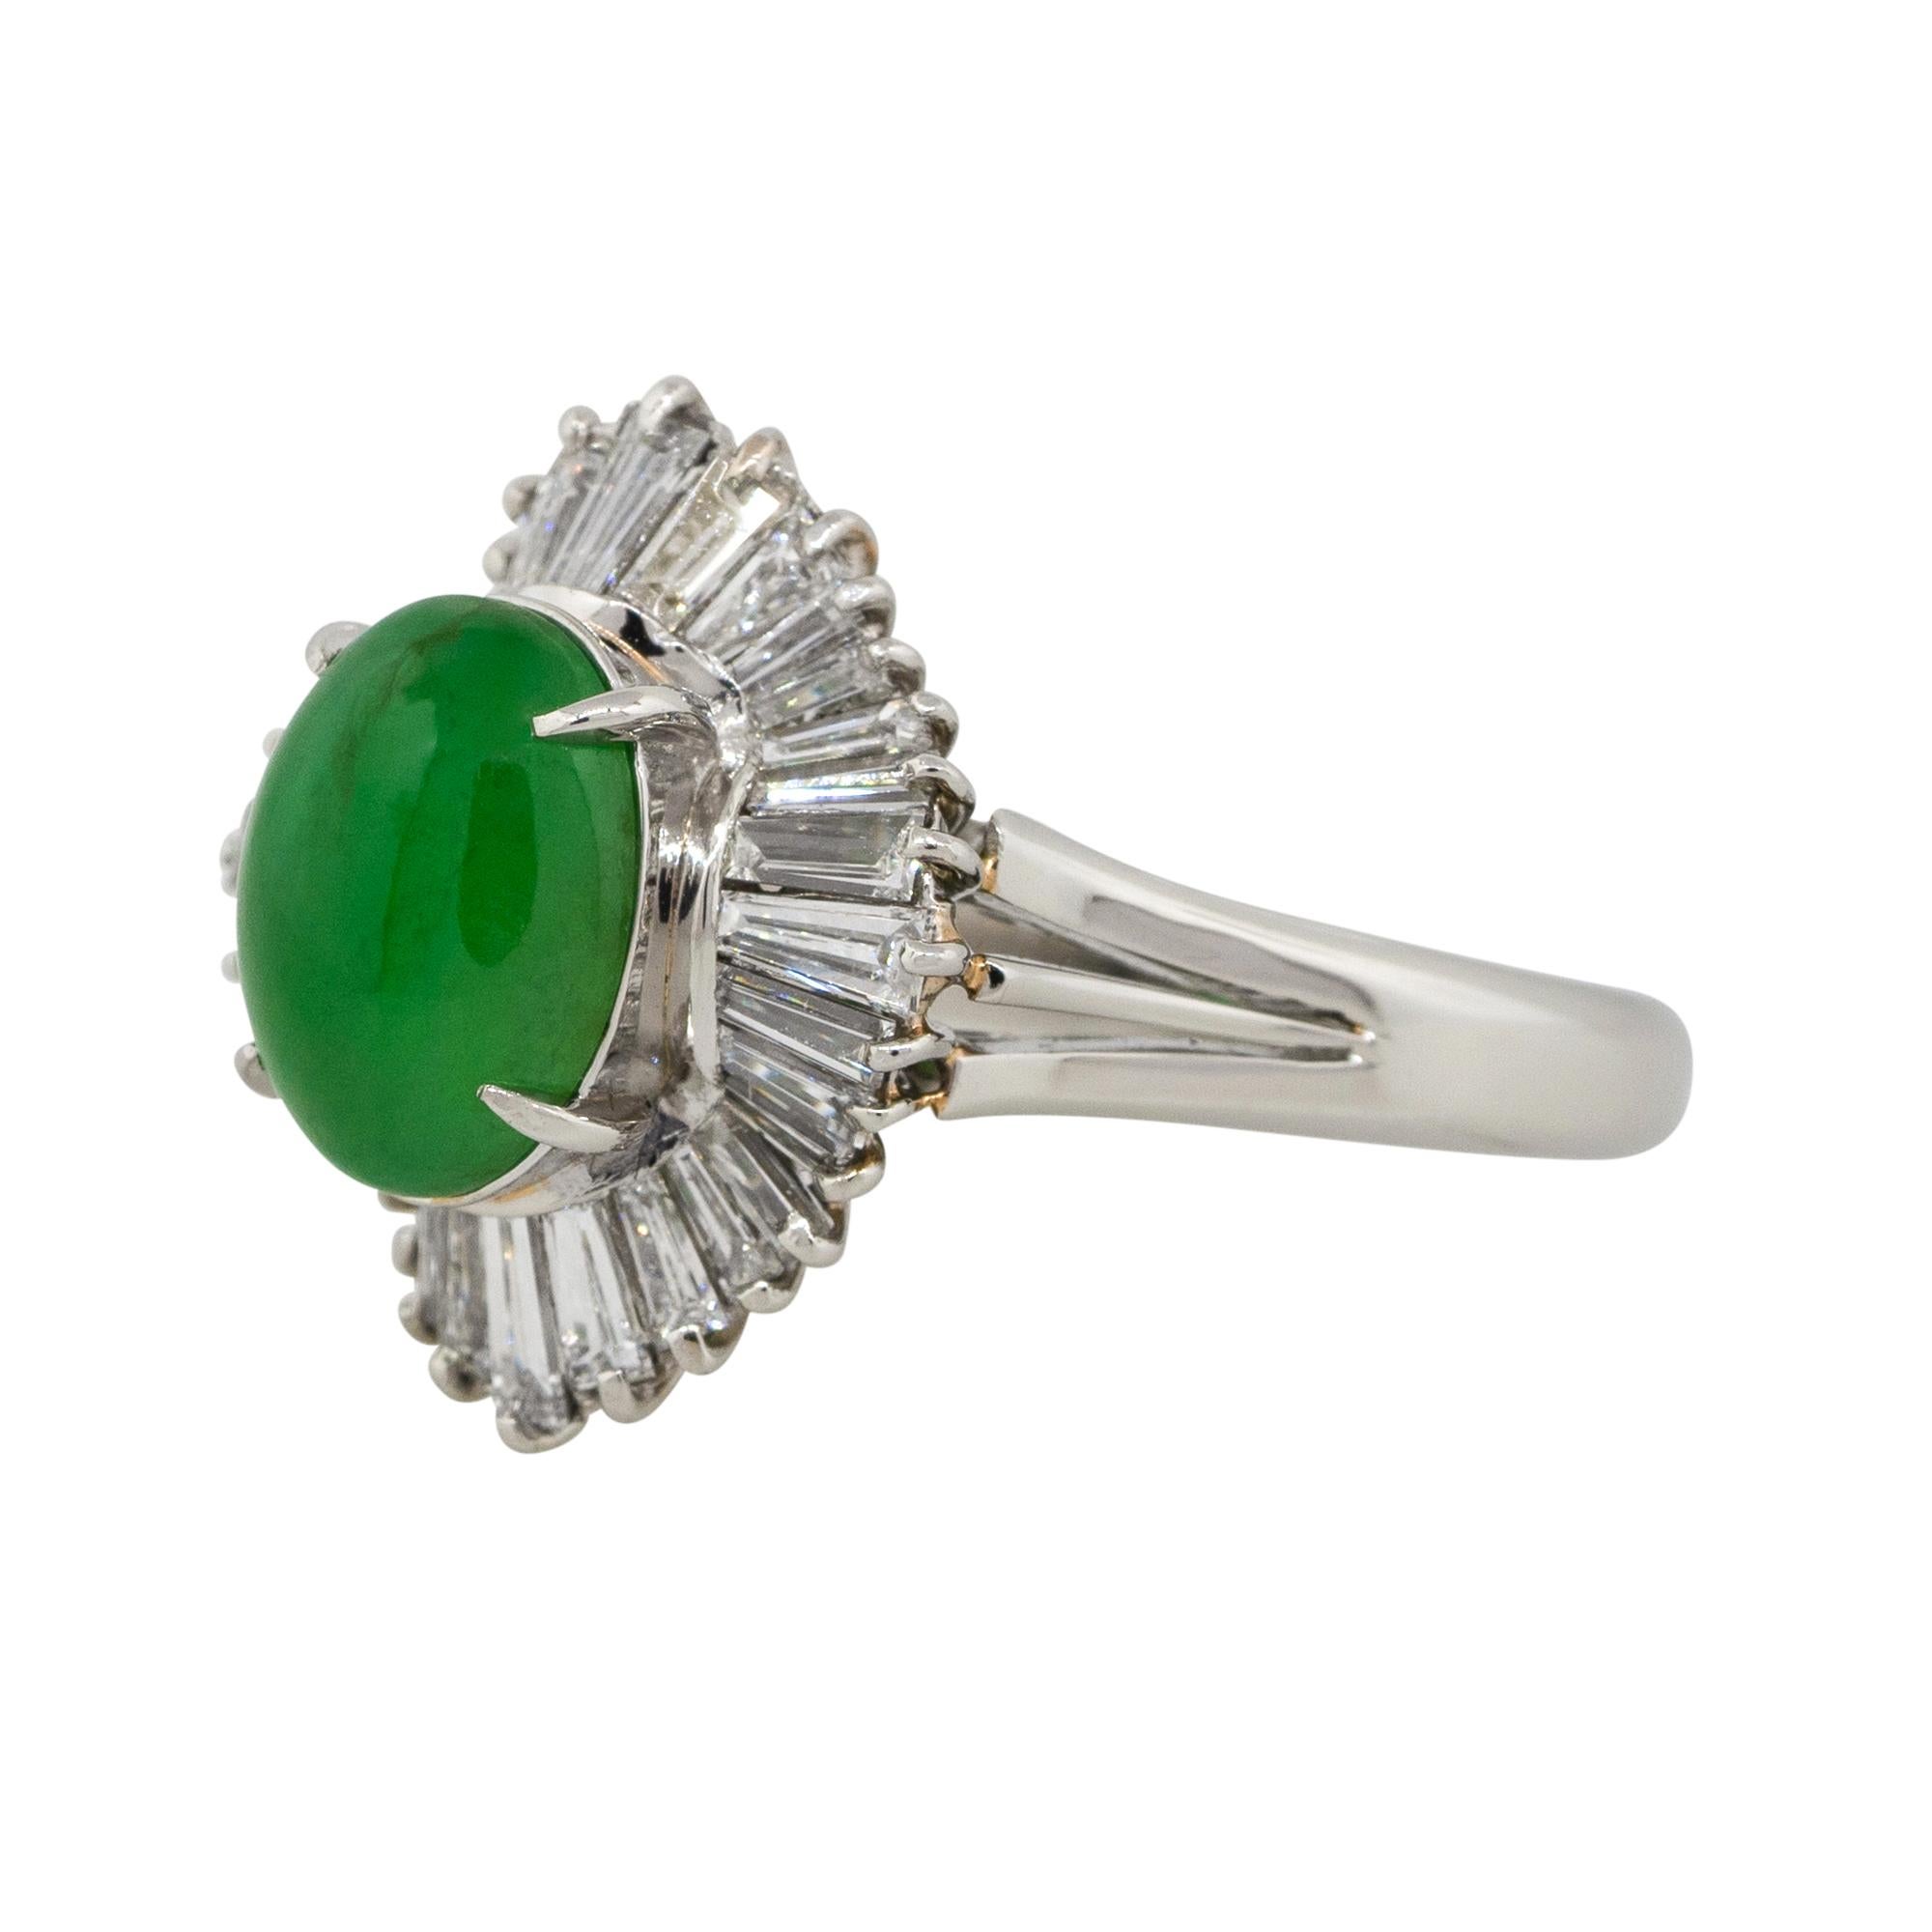 Material: Platinum
Gemstone details: Jade cabochon center gemstone
Diamond details: Approx. 1.04ctw of baguette cut Diamonds. Diamonds are G/H in color and VS in clarity
Ring Size: 6.25 
Ring Measurements: 0.75